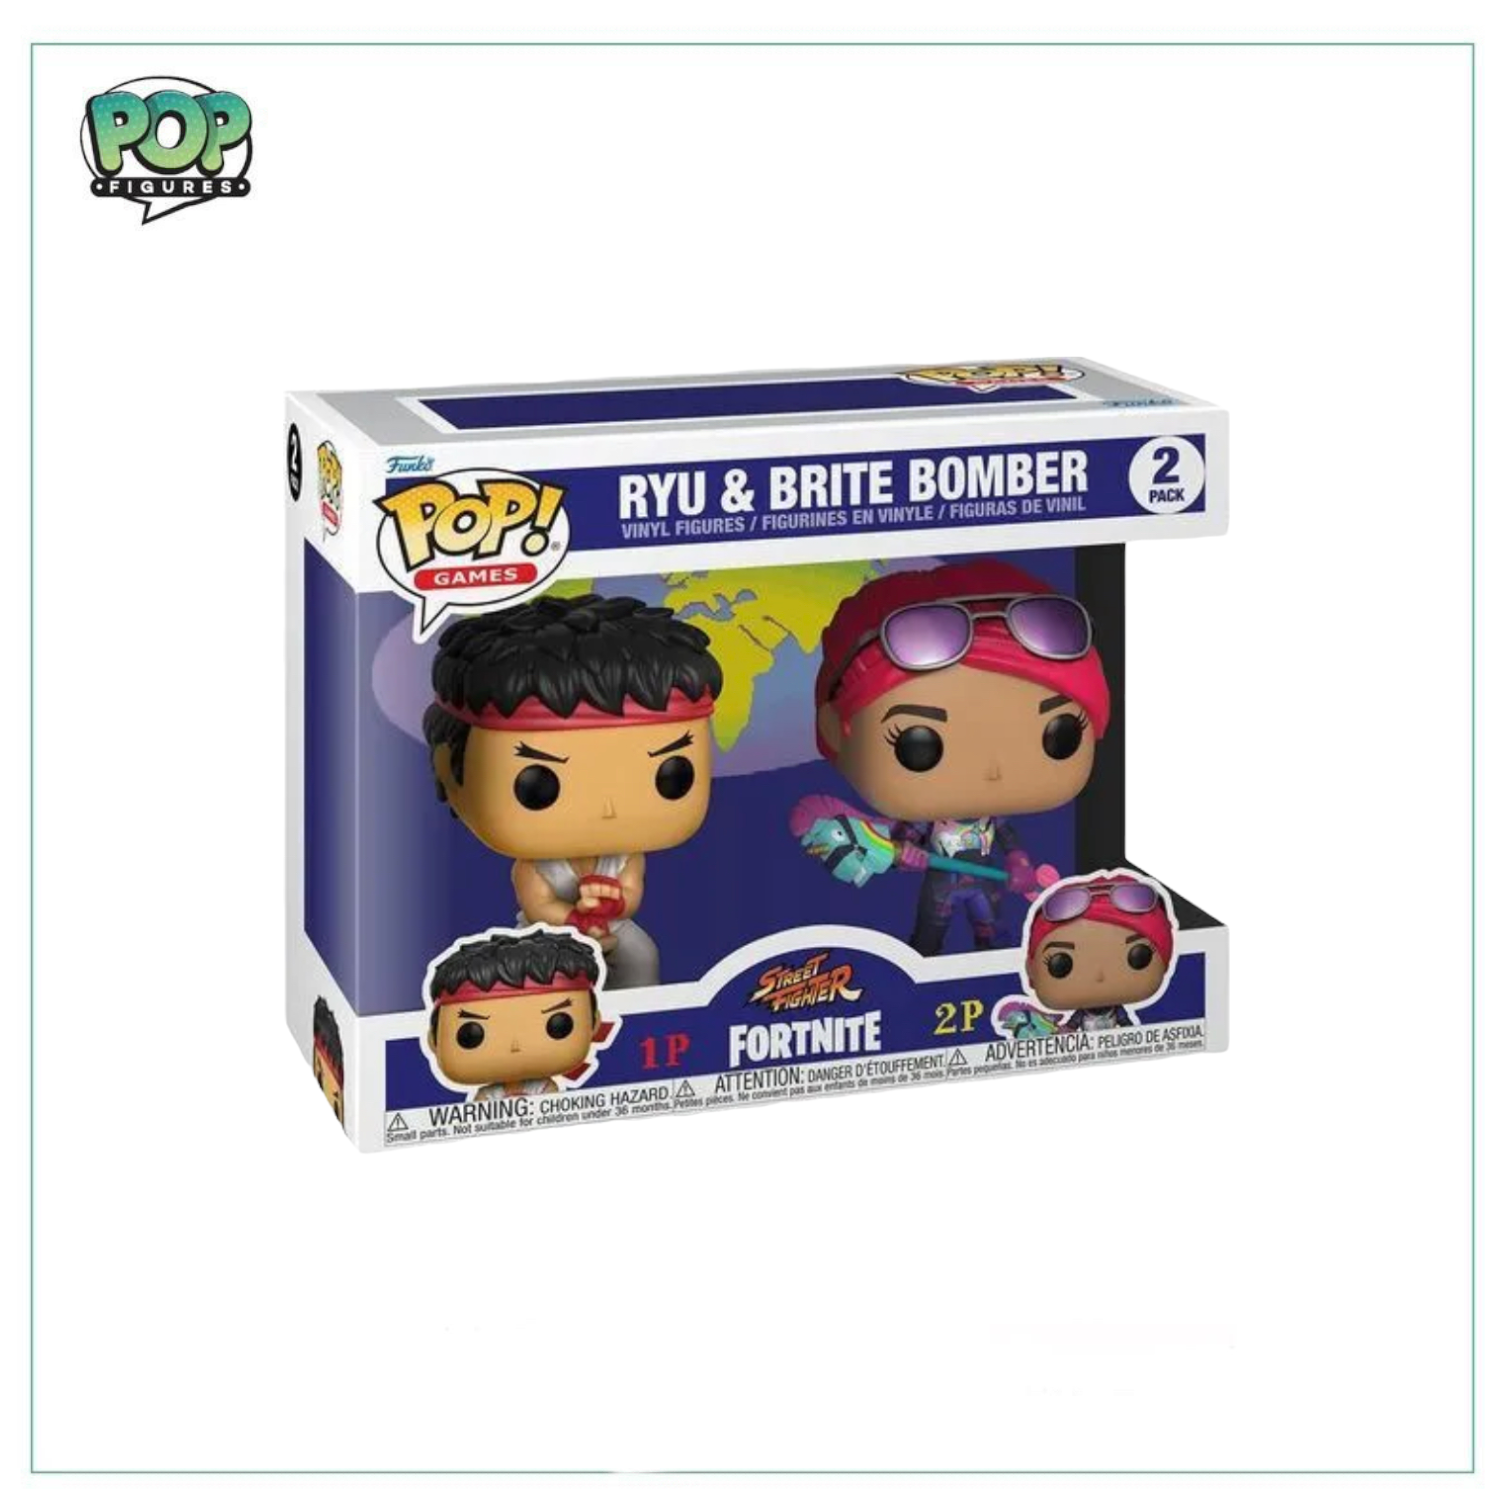 Ryu & Brite Bomber Deluxe Funko 2 Pack! Street Fighter Fortnite - Angry Cat